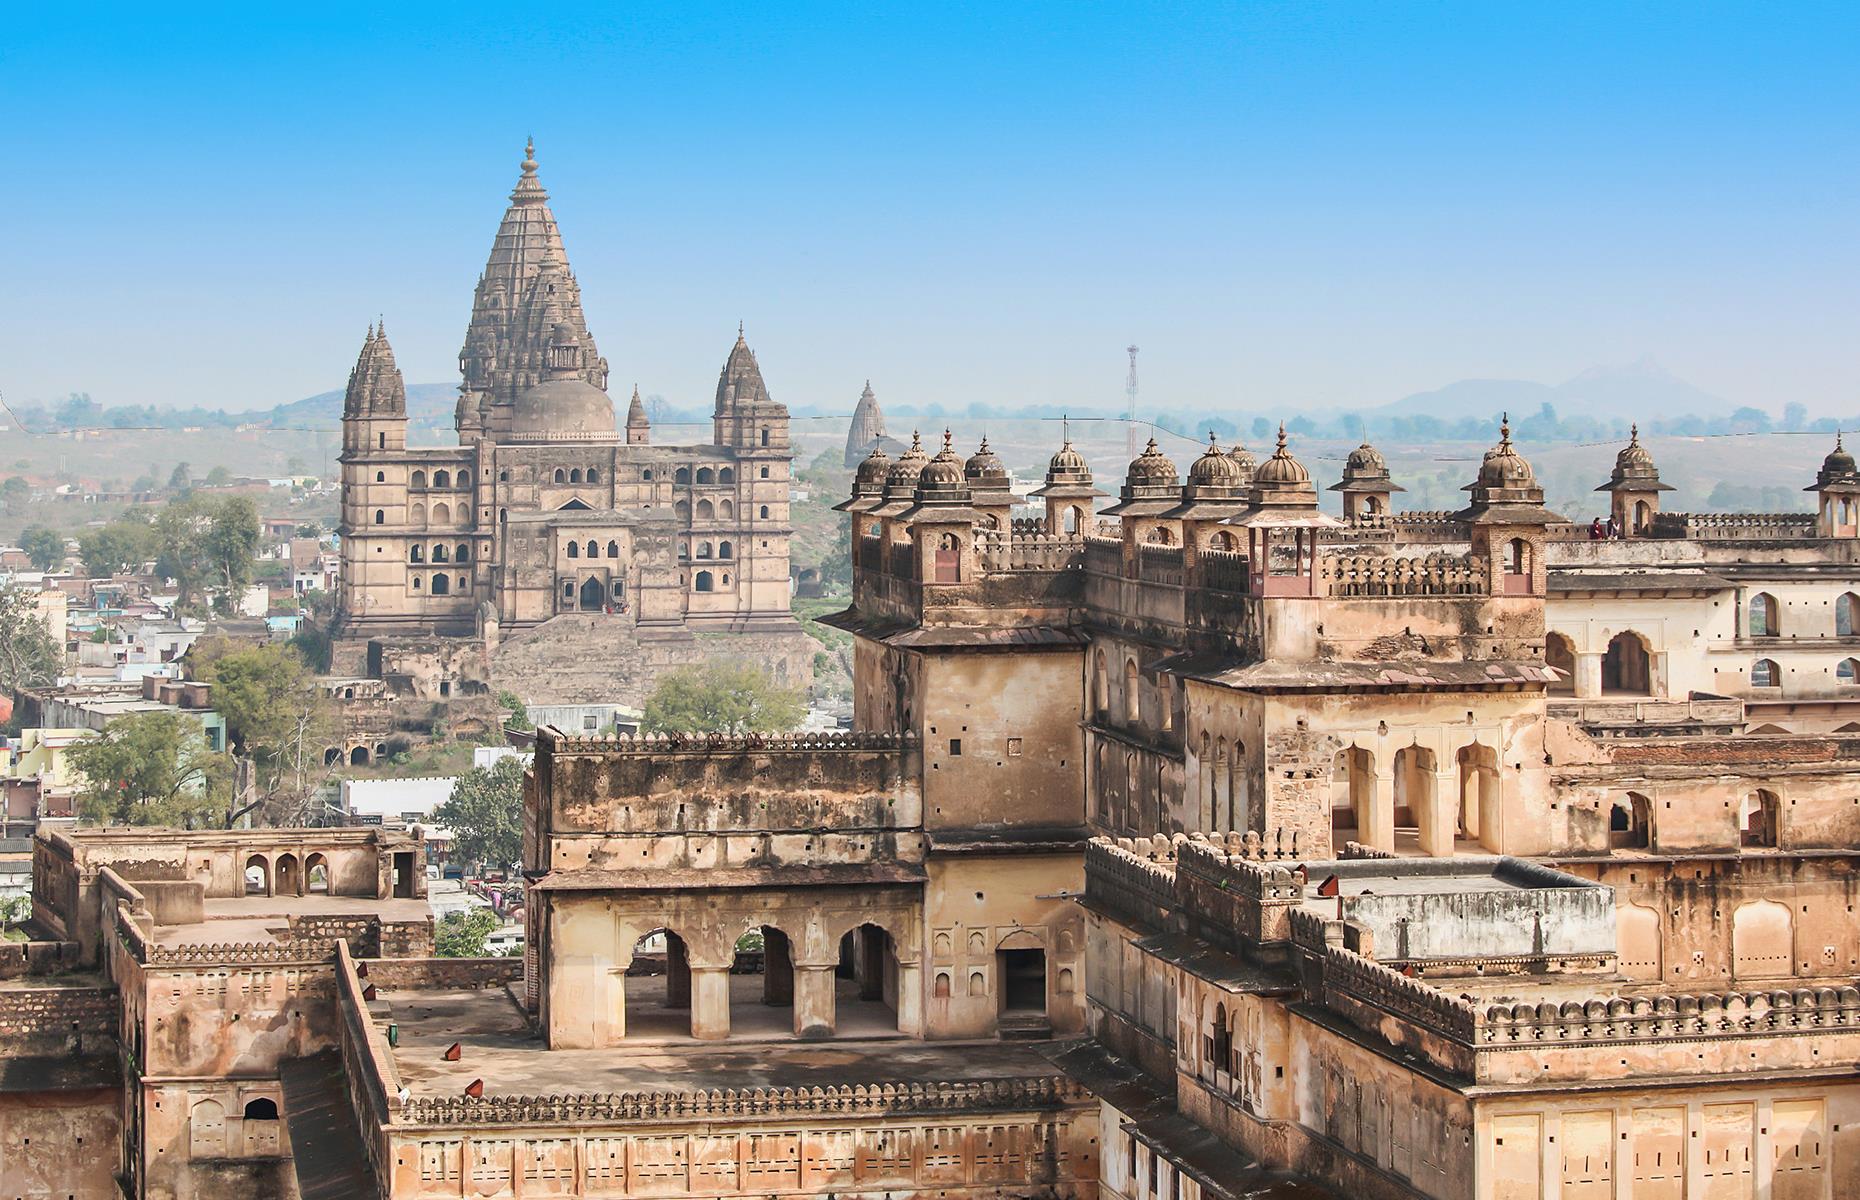 <p>One of Rajasthan's most magical spots, Orchha doesn't appear on the usual Golden Triangle itineraries around the state, and it's all the better for it. The small town has a complex of towering temples, palaces, and monuments within its medieval fort, and ample legends and folklore add intrigue for visitors.</p>  <p>Come with a guide to make the most of it, and don't miss the sunset from across the river when the ancient towers will be silhouetted against a pinkish, yellowing sky.</p>